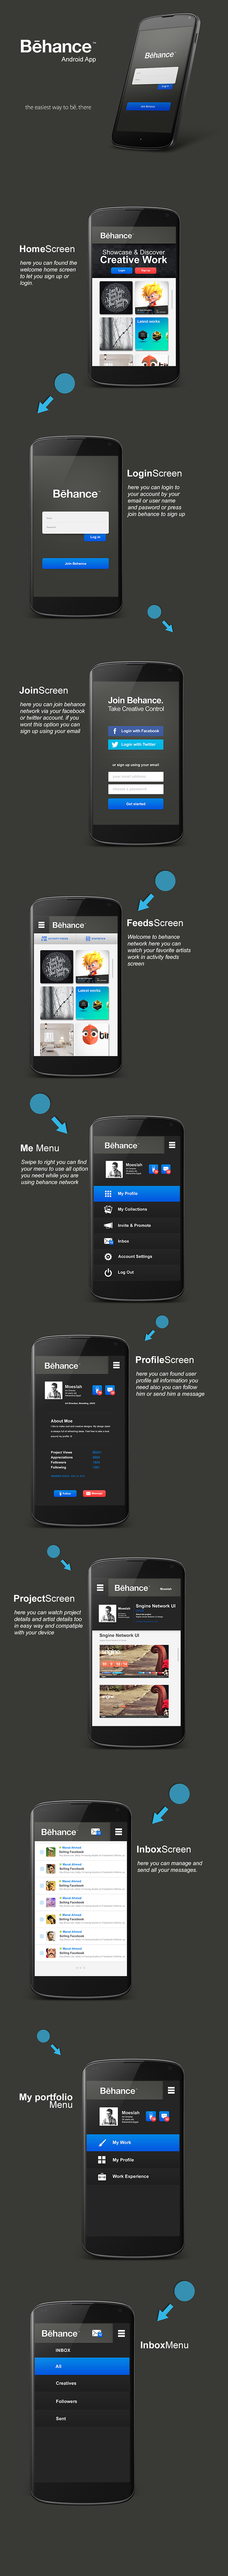 Behance Network android app re-design